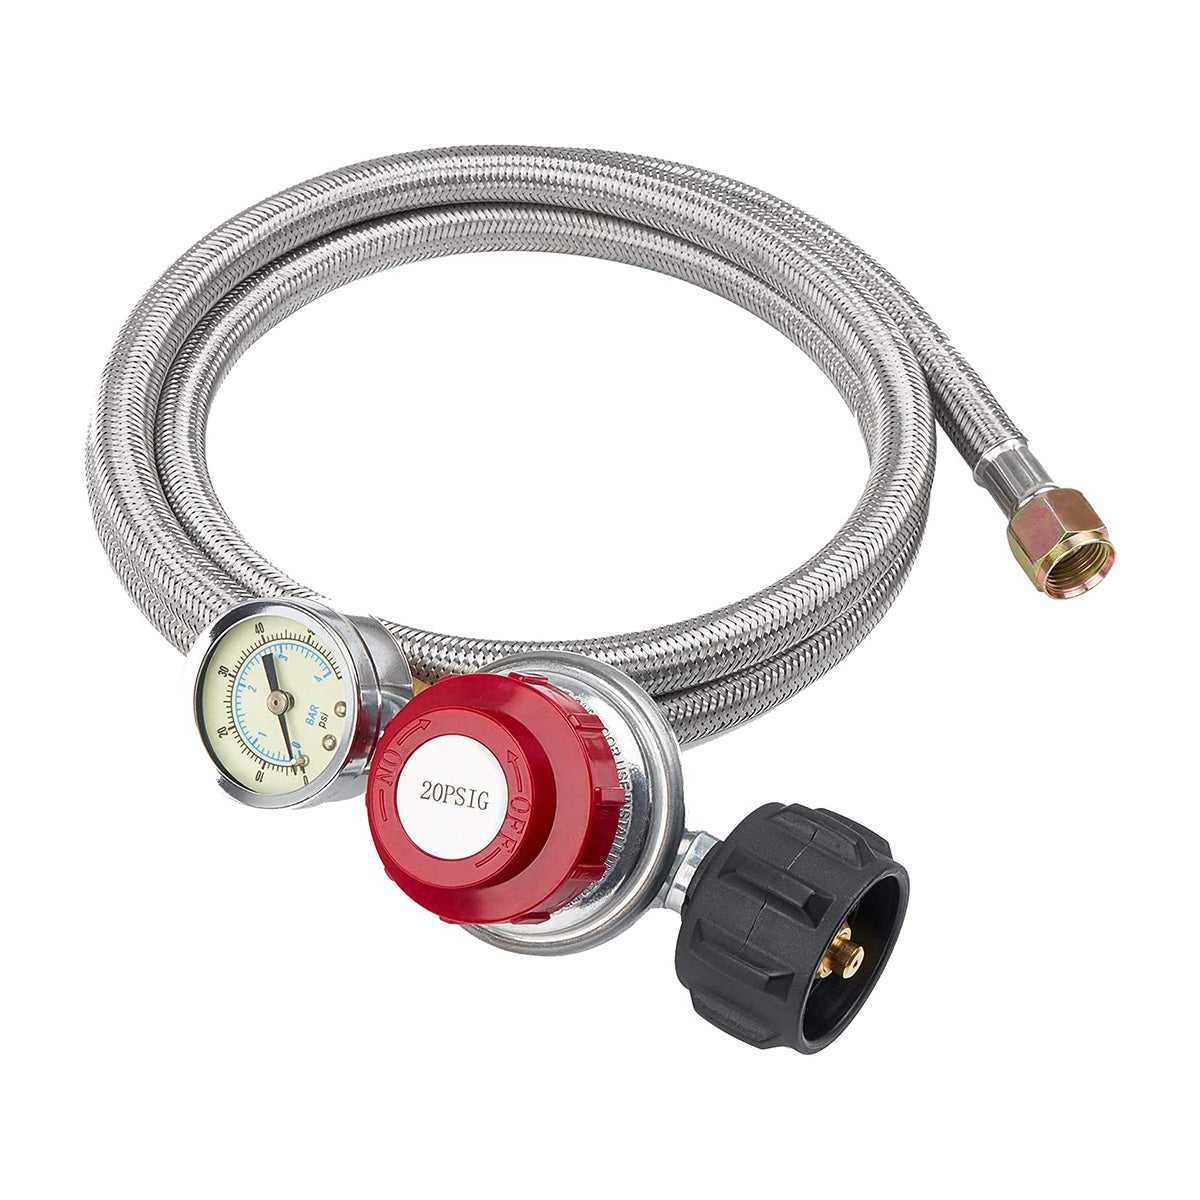 Solimeta Dual Propane Tank Connection, Propane Tank Y Splitter Adapter with  Gauge, Level Indicator, Gas Pressure Meter for RV Camper, Cylinder, BBQ